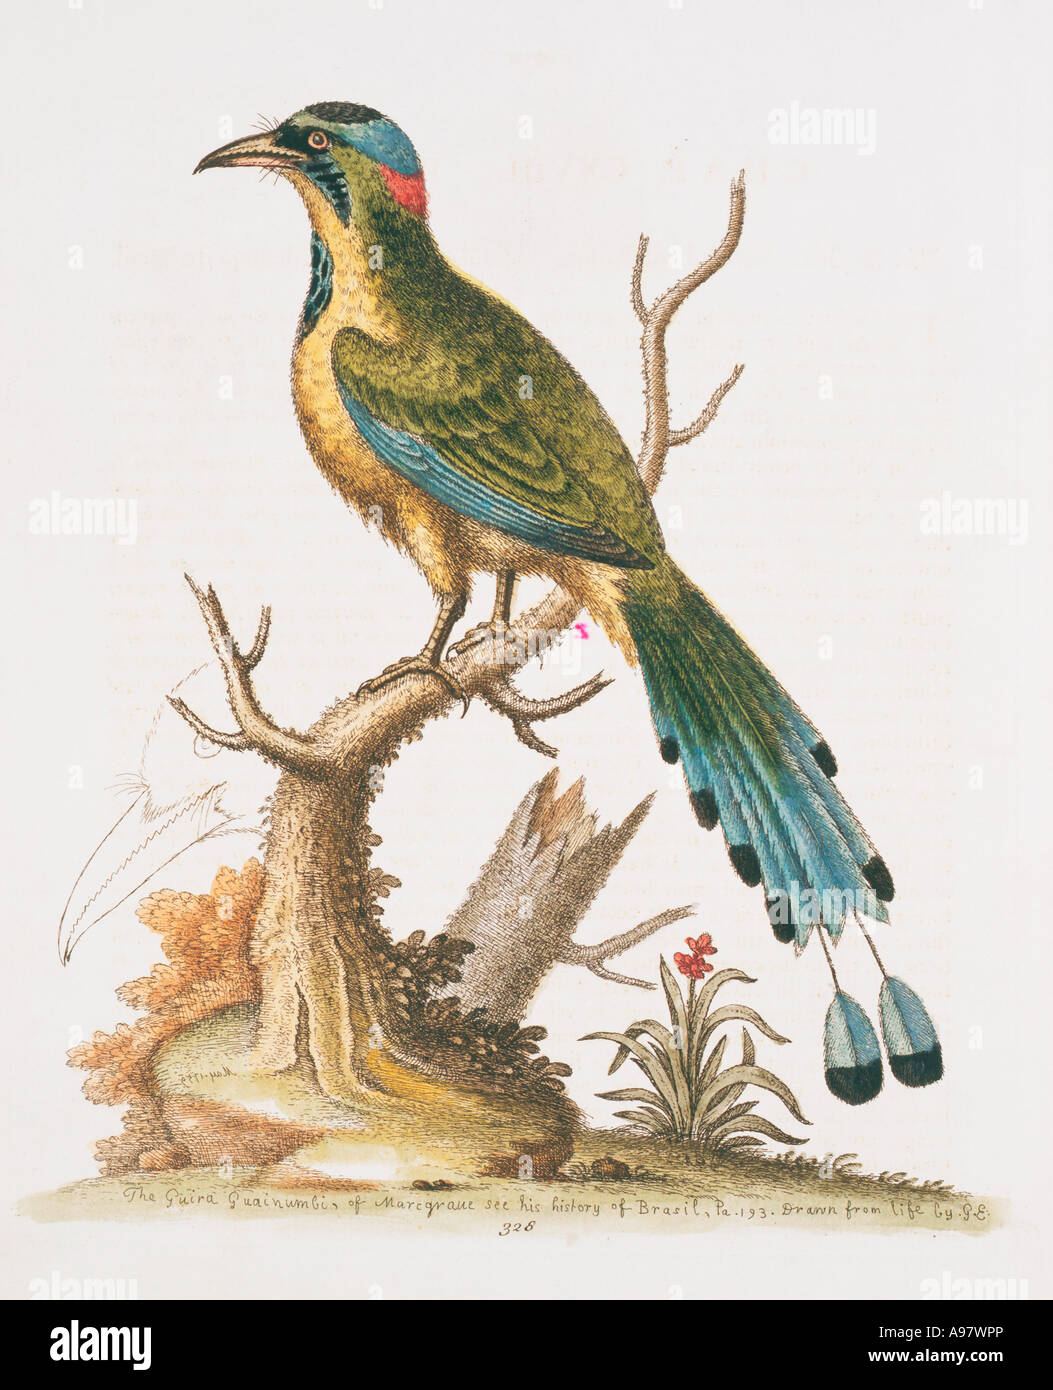 Plate 327 from The Gleanings of Natural History by George Edwards Stock Photo